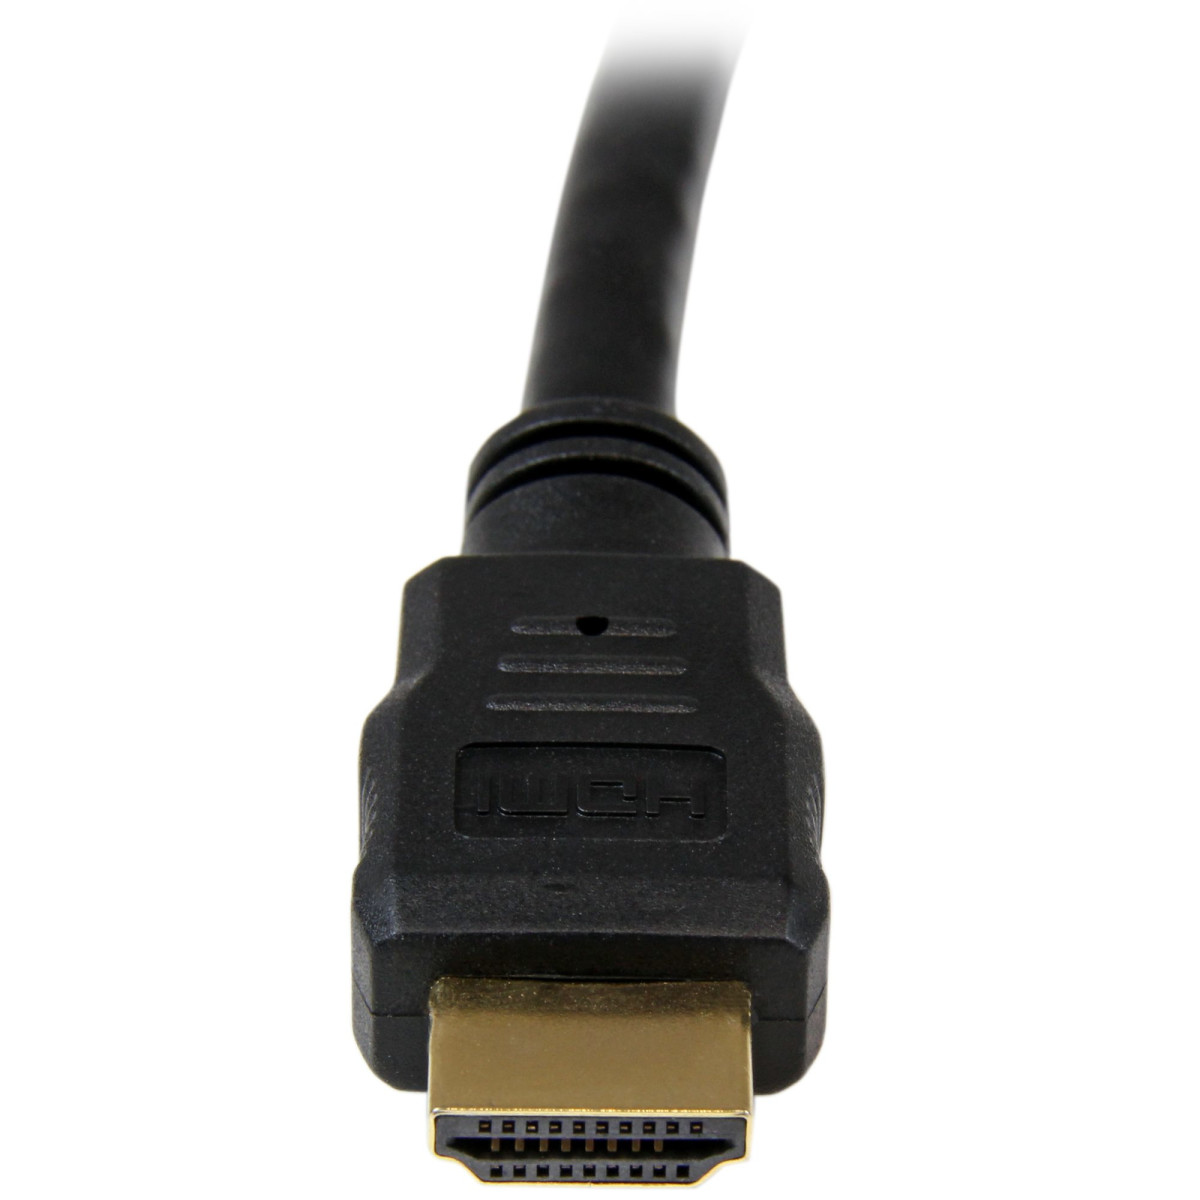 2m High Speed HDMI Cable